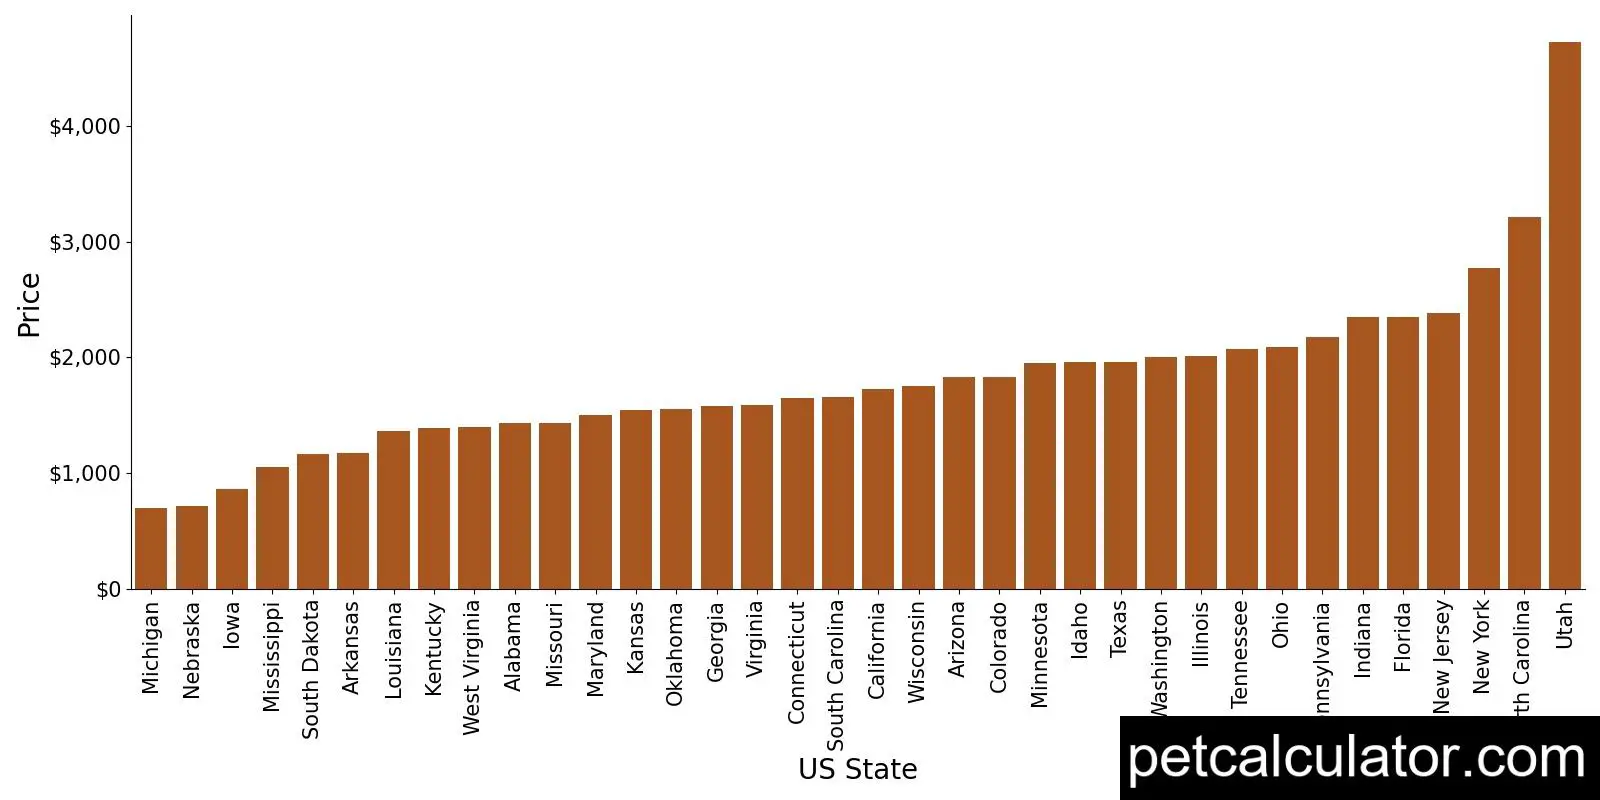 Price of Miniature Schnauzer by US State 